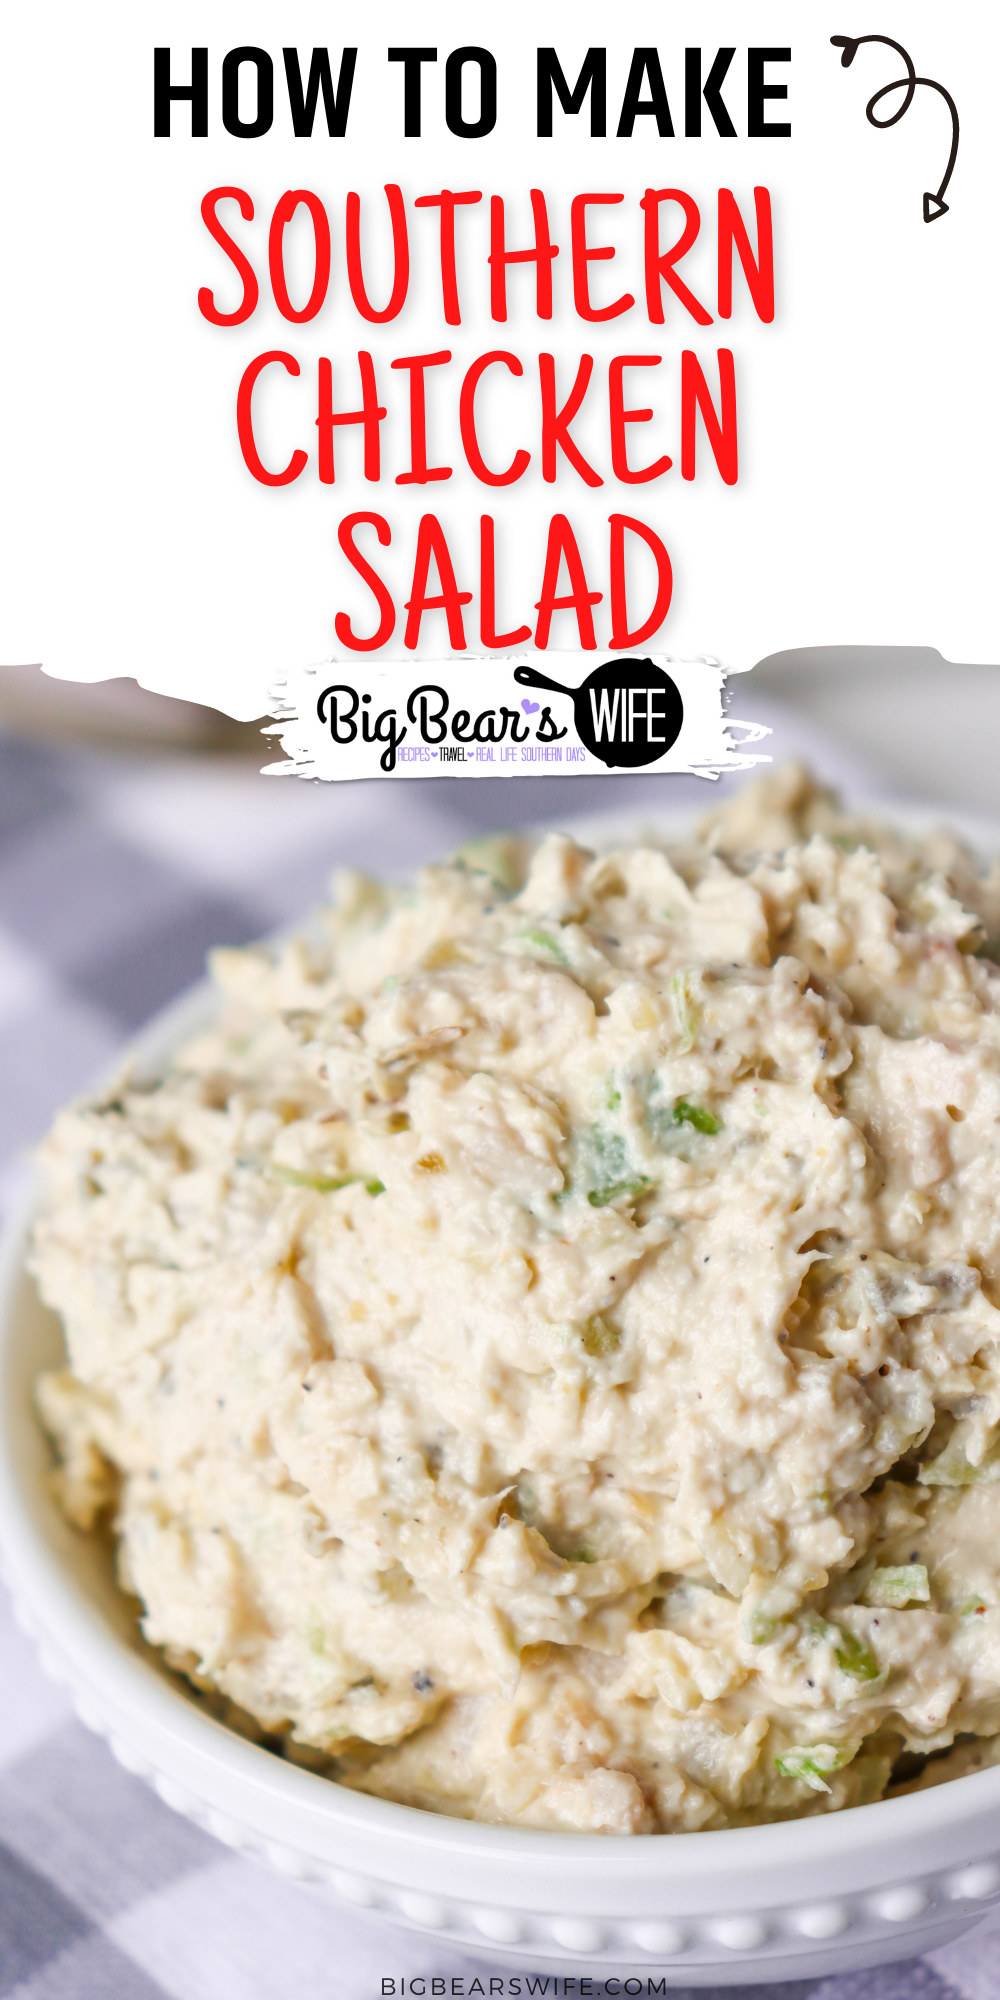 This Southern Chicken Salad Recipe is great for Chicken Salad Sandwiches or as a spread for crackers. My Southern Chicken Salad Recipe is my copycat version of the famous Midtown Market Chicken Salad!  via @bigbearswife